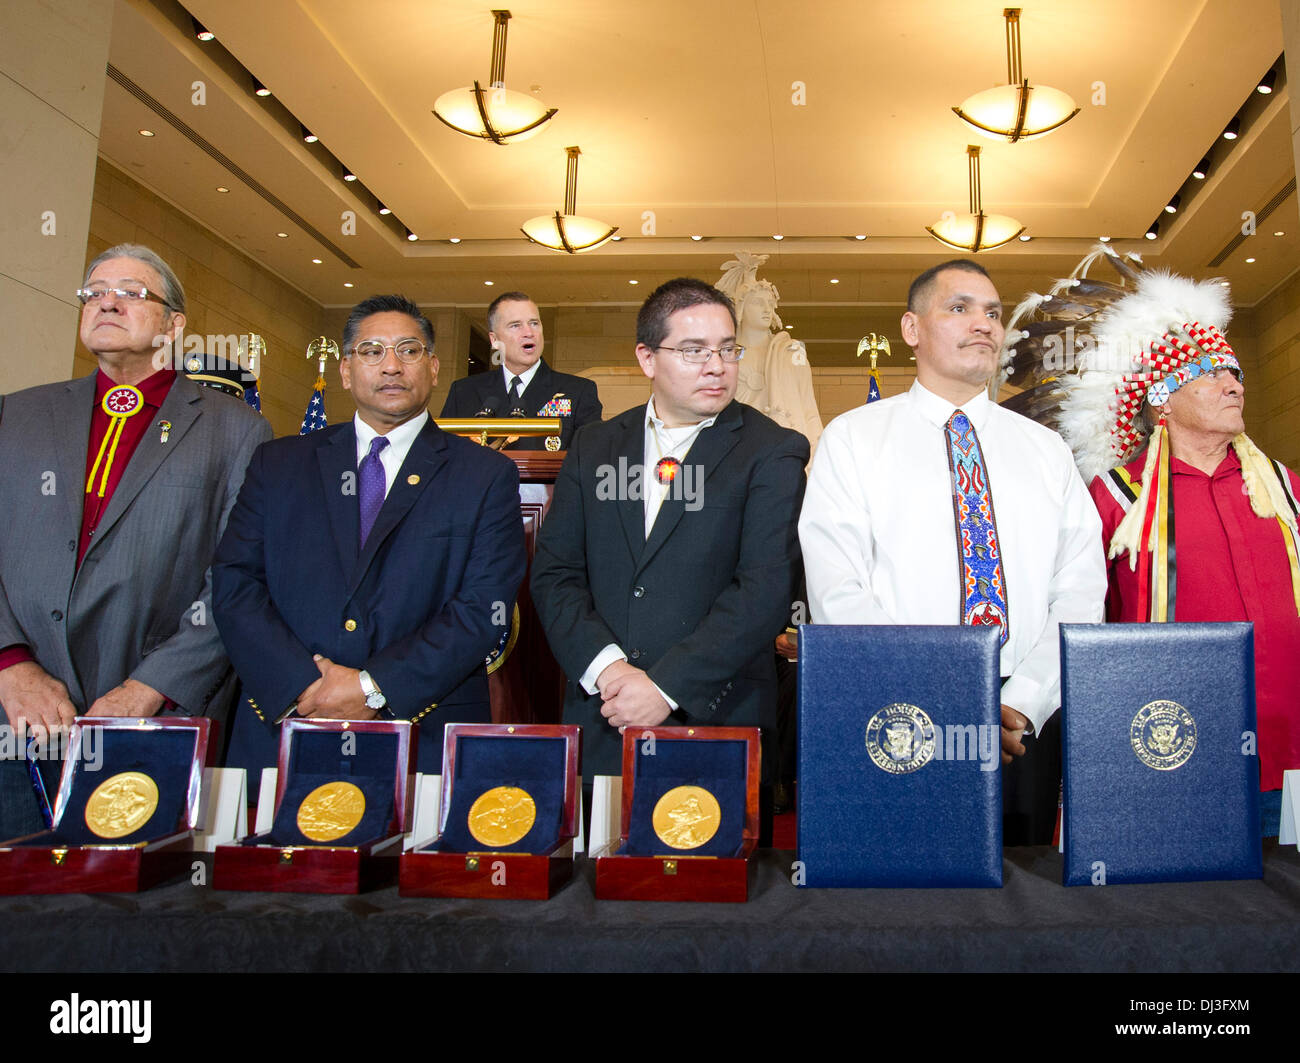 Representatives of Native American tribes stand during the Congressional Gold Medal Ceremony Honoring Native American Code Talkers in Emancipation Hall at the US Capitol Nov. 20, 2013 in Washington, DC . The Congressional Gold Medal was awarded to Native American code talkers for their valor and dedication during World War I and World War II. Stock Photo